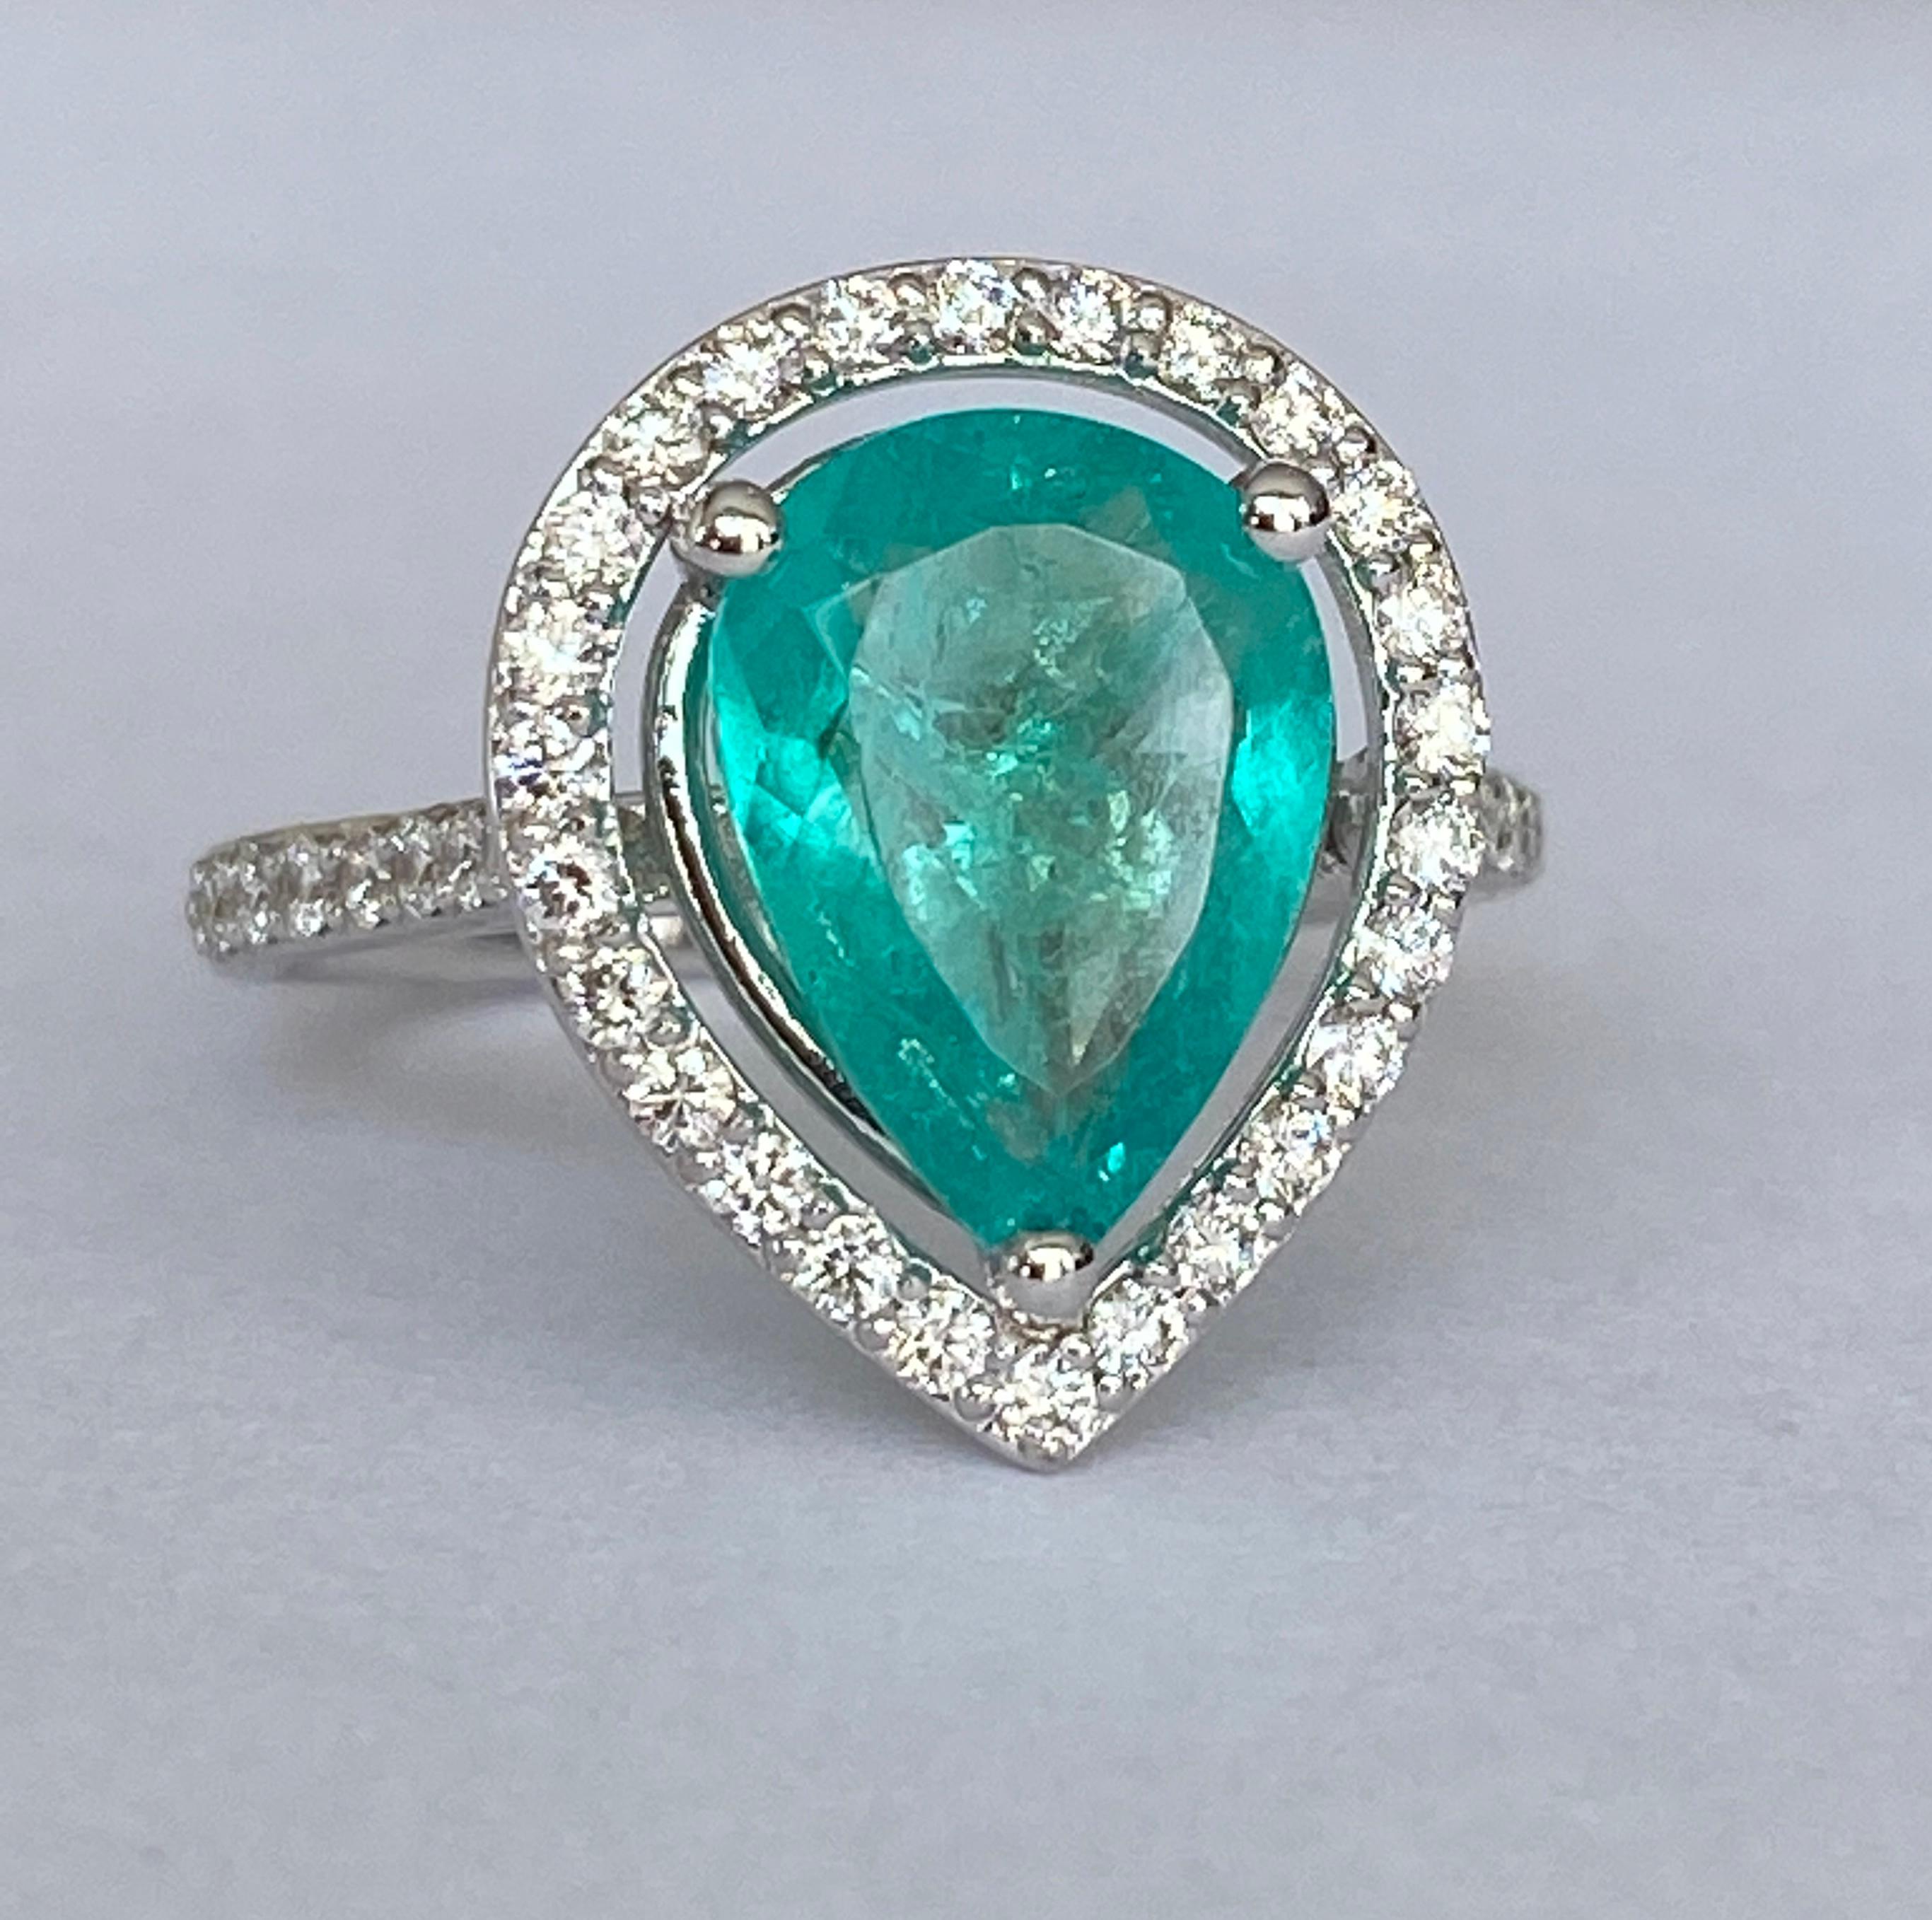 Offered in new  condition, Cocktail ring in white gold, with an pear mixed cut emerald  of 2.30 ct. The stone is surrounded by an entourage of 40  pieces of brilliant cut diamonds, approx. 0.48 ct in total, of quality F/G/VS/SI. ALGT certificate is